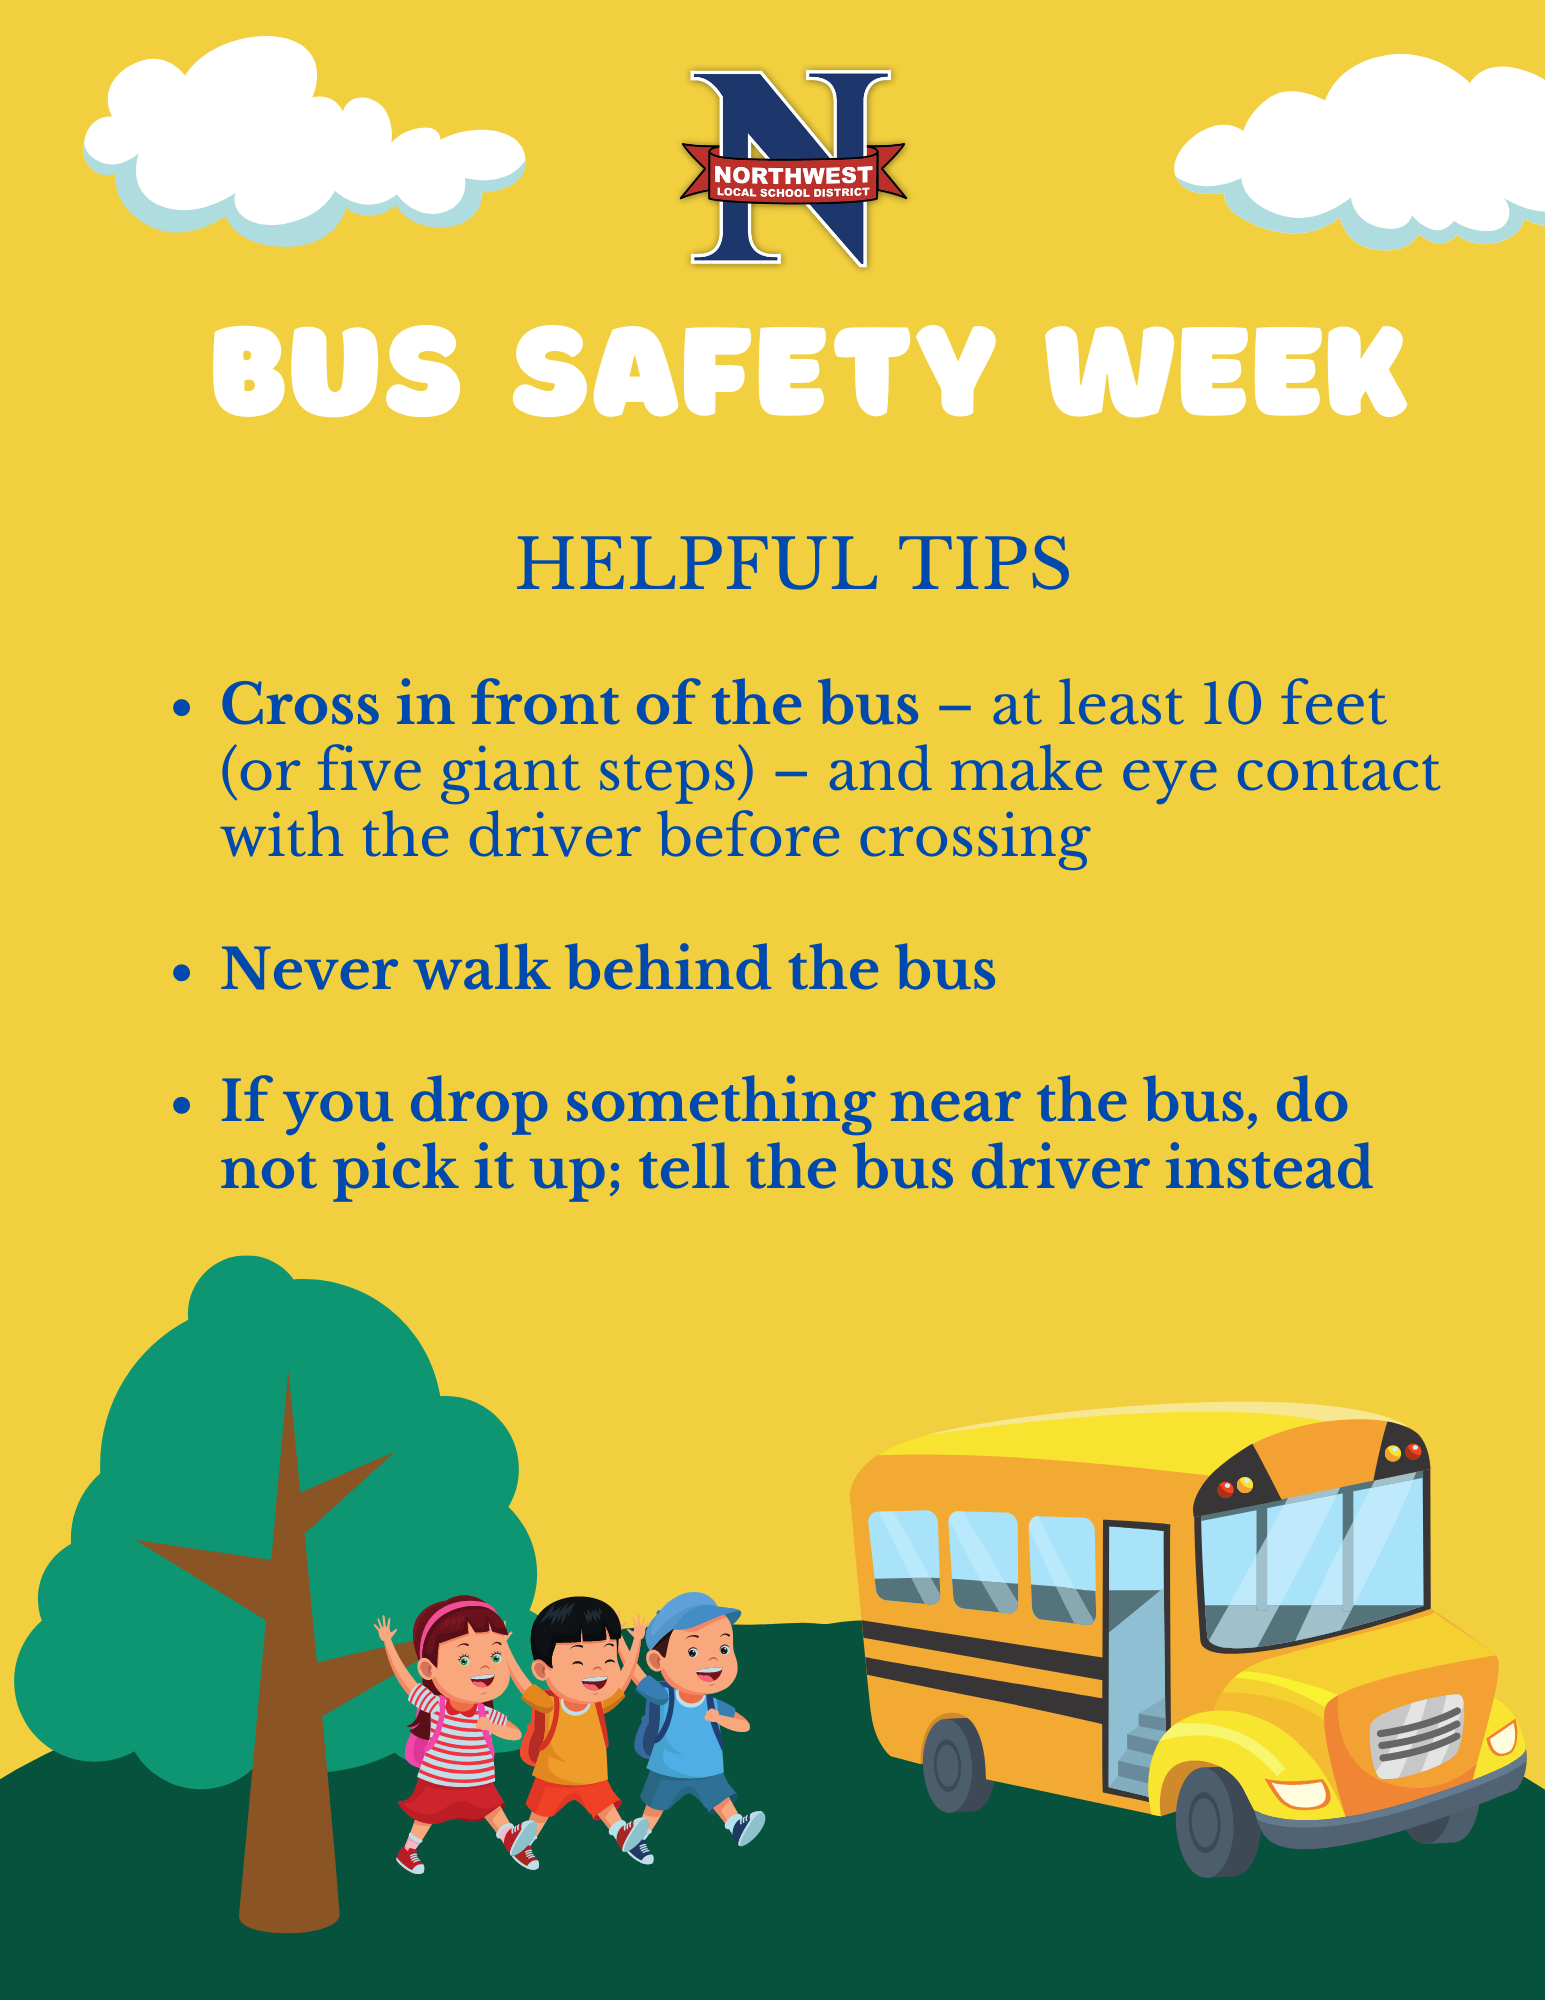 National School Bus Safety Week     It's National School Bus Safety Week and we want our students to remain safe at all times by remembering these helpful tips:   •	Cross in front of the bus – at least 10 feet (or five giant steps) – and make eye contact with the driver before crossing   •	Never walk behind the bus   •	If you drop something near the bus, do not pick it up; tell the bus driver instead